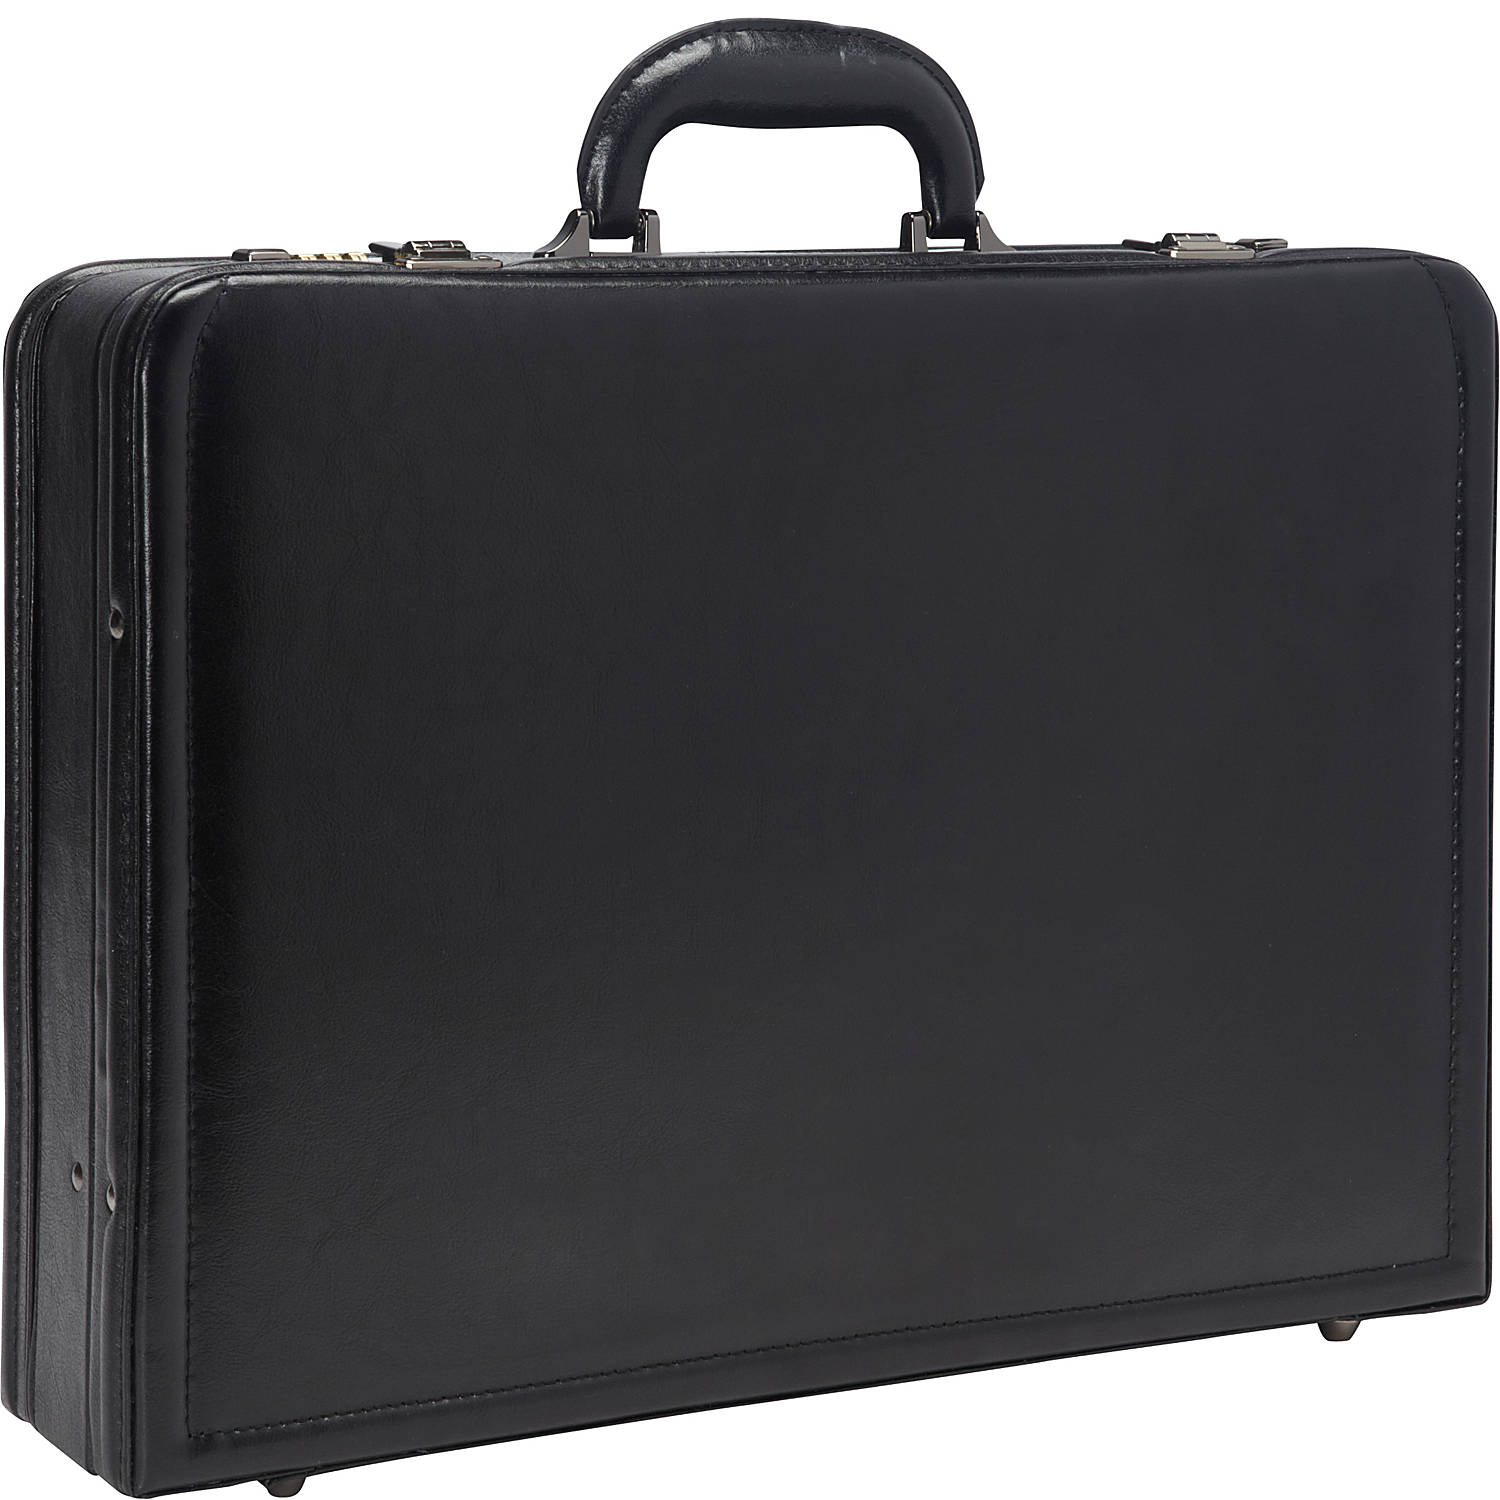 Kenneth Cole Reaction Changed The Lock Laptop Attache - eBags.com